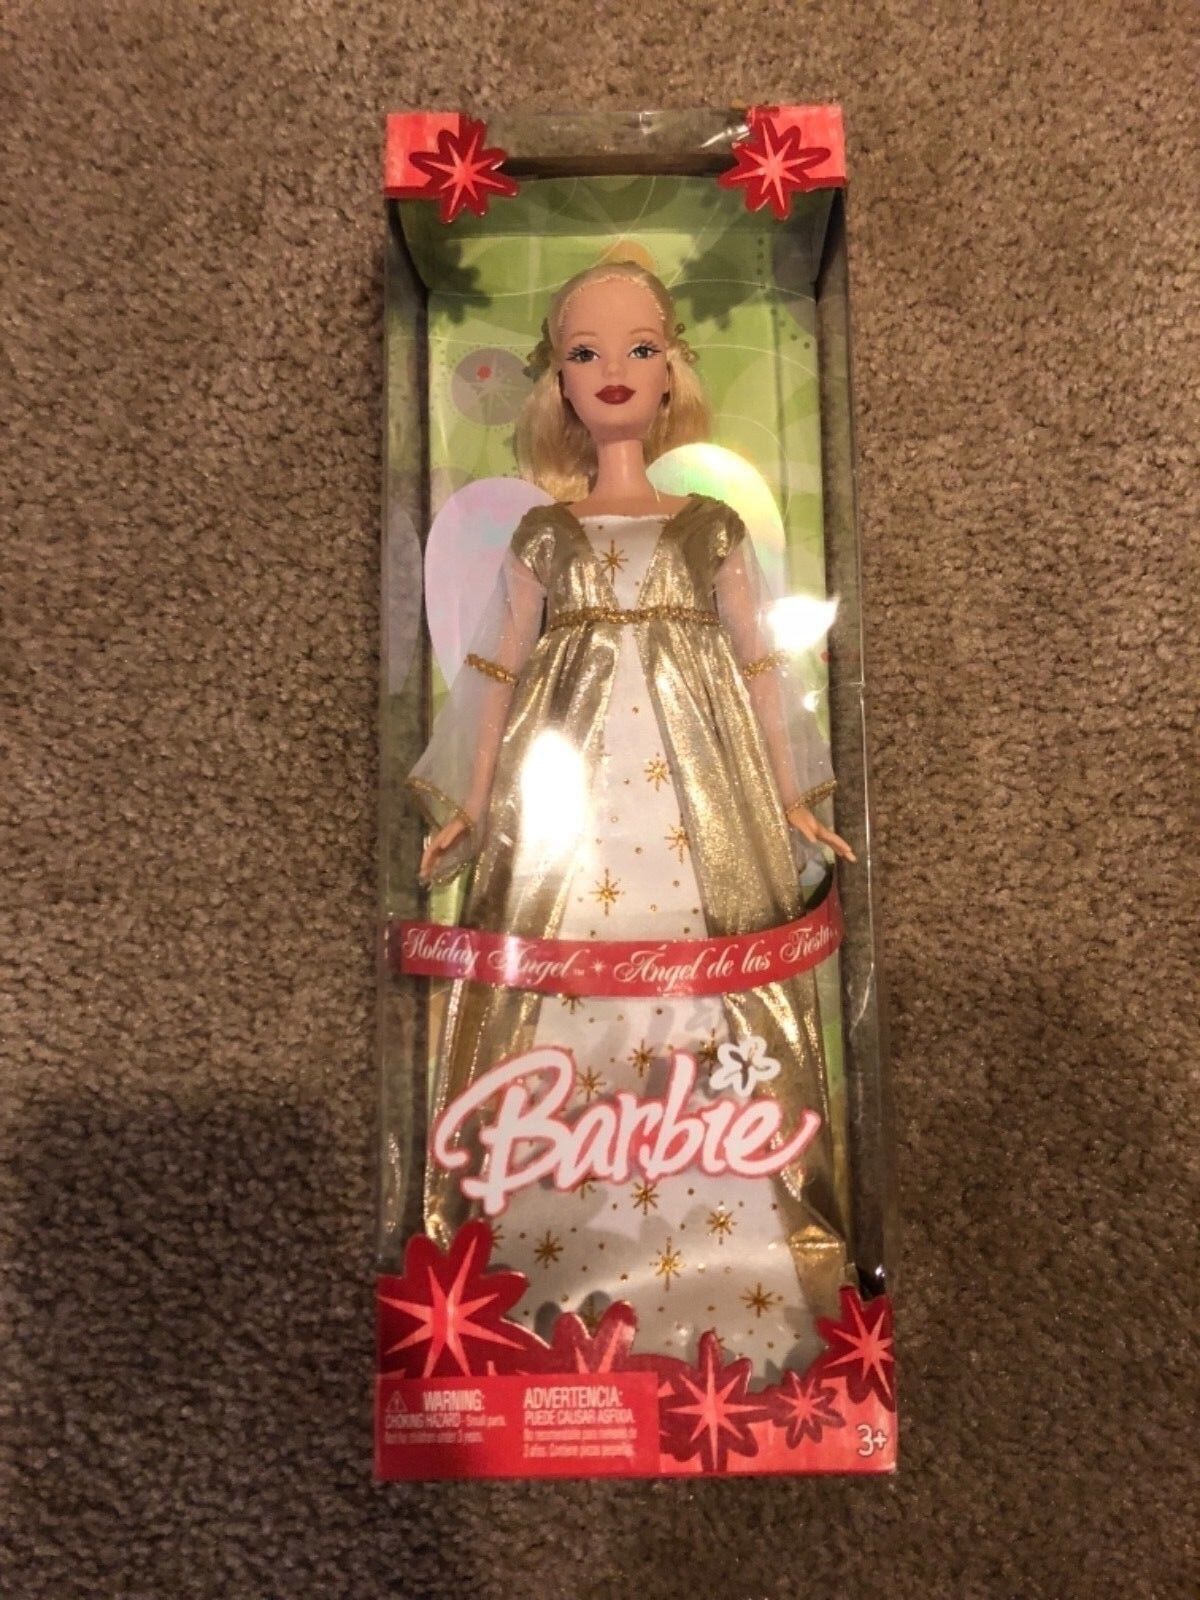 Primary image for 2005 Mattel 12" Holiday Blonde Angel Barbie White & Gold Gown w/Golden Crown NIB